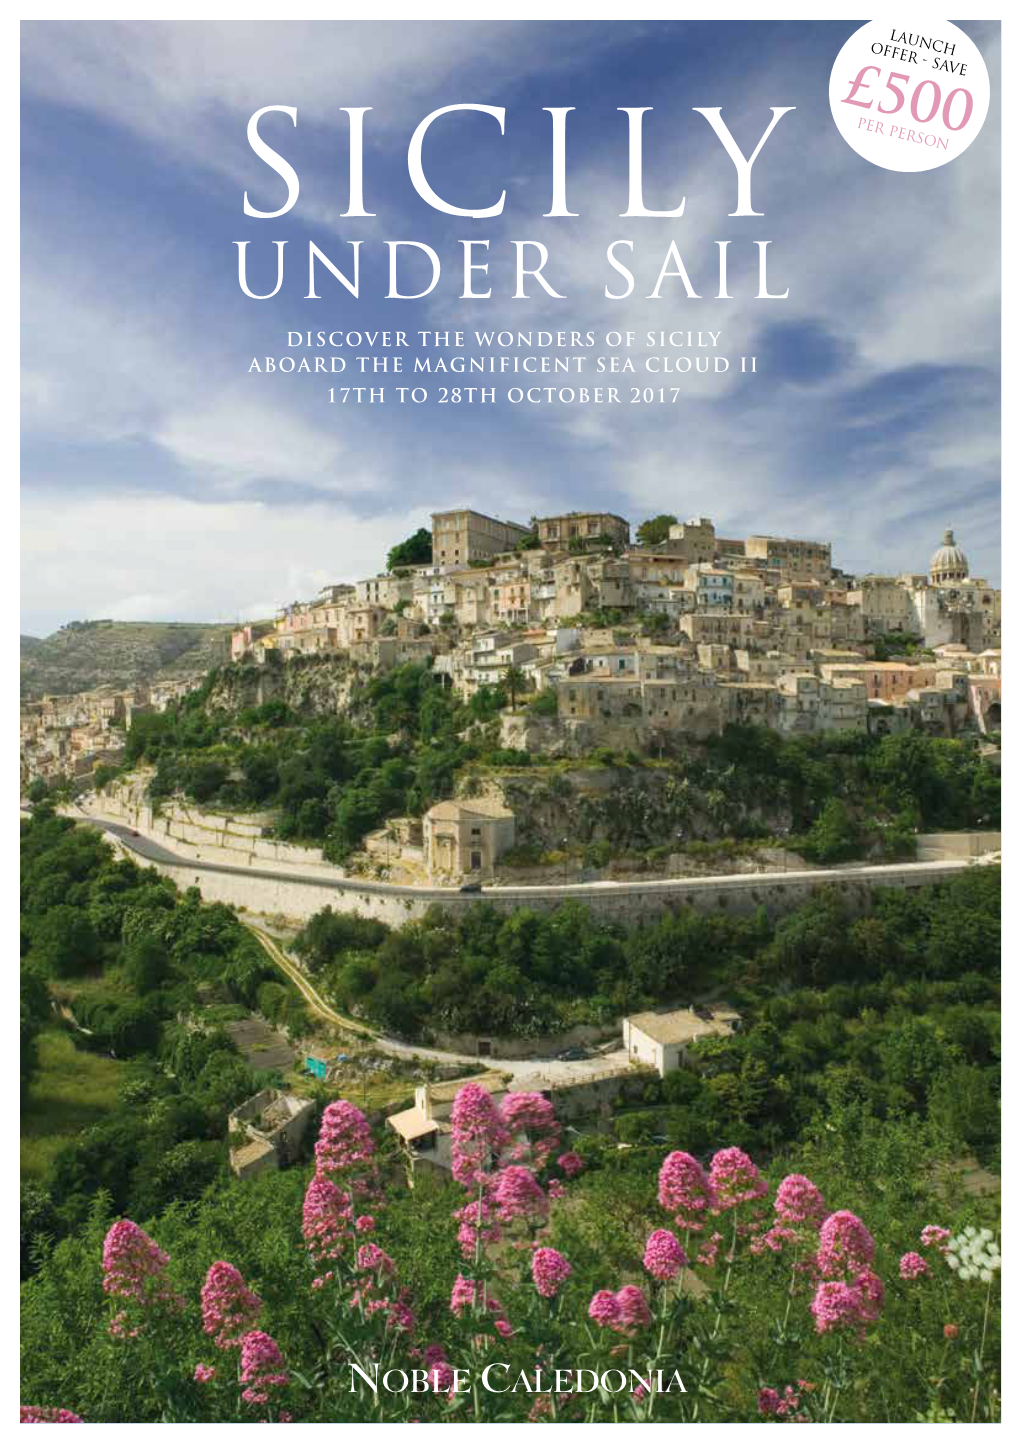 UNDER SAIL DISCOVER the WONDERS of SICILY ABOARD the MAGNIFICENT SEA CLOUD II 17TH to 28TH OCTOBER 2017 Taormina